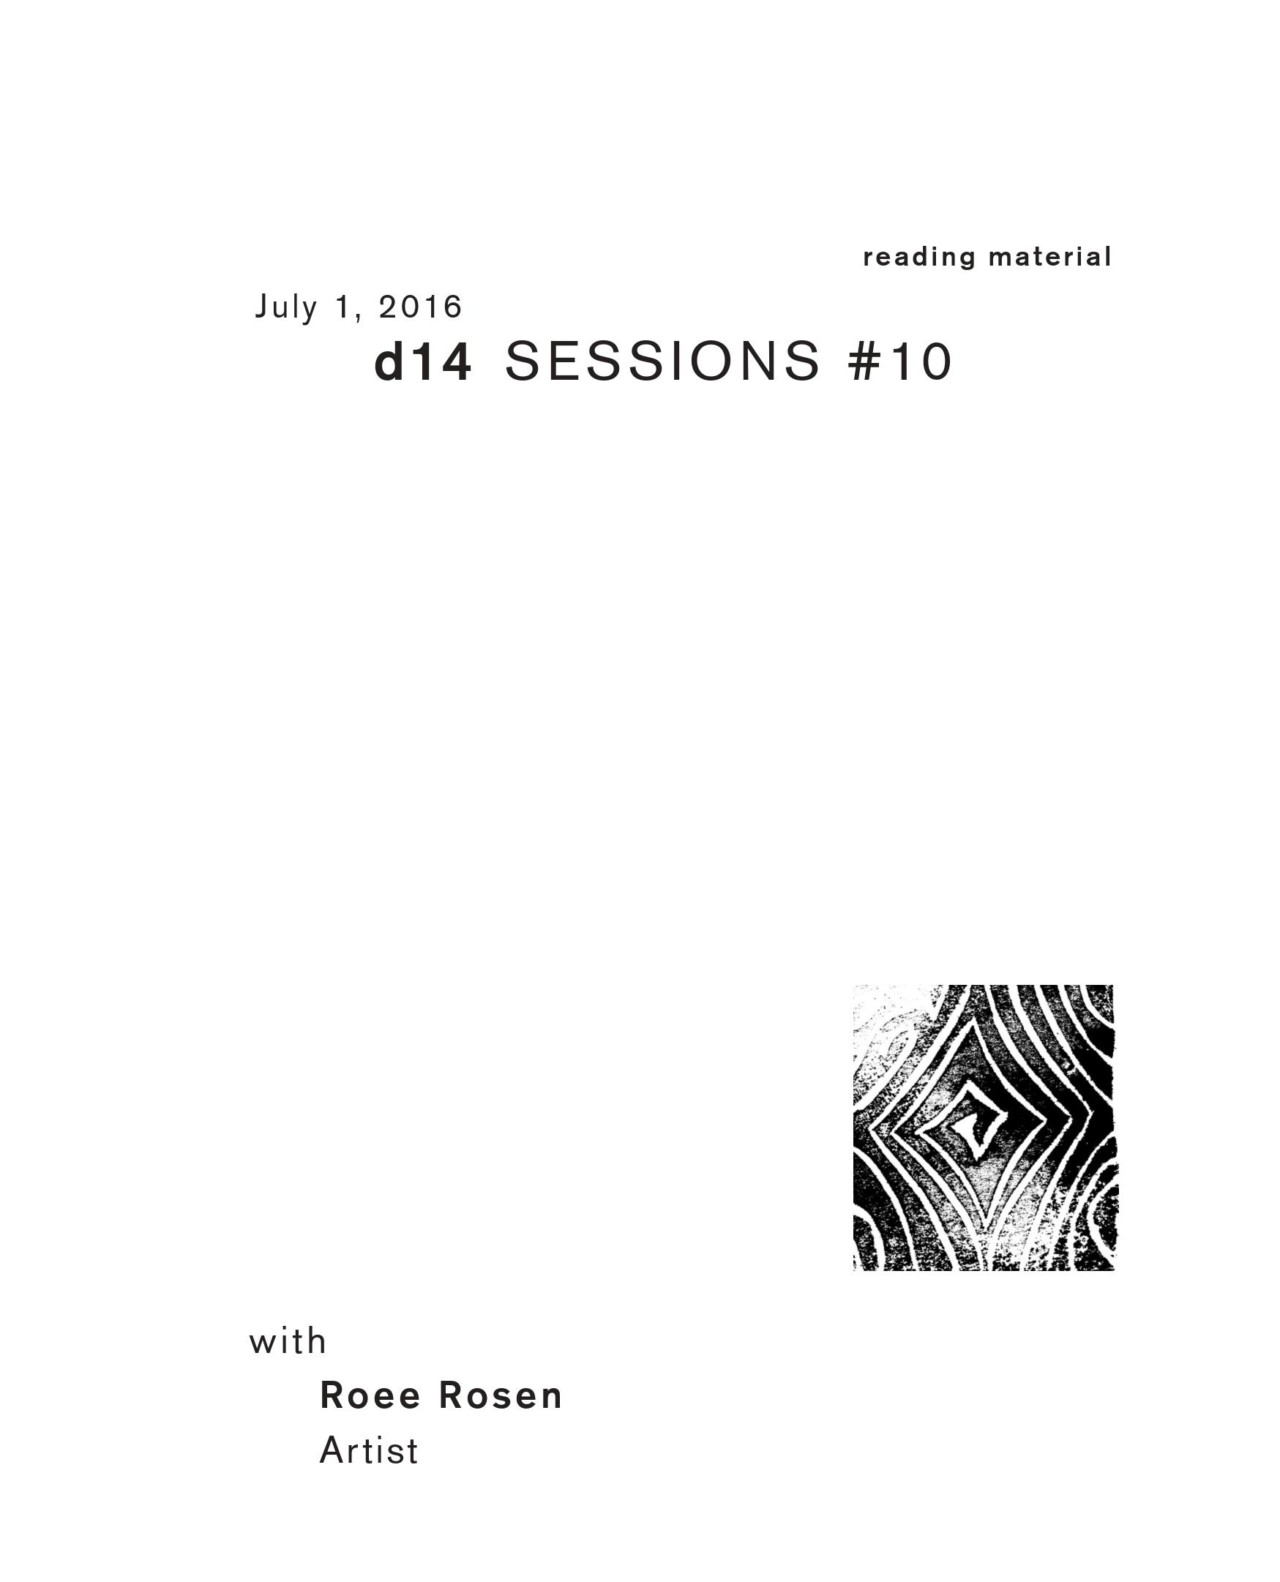 Membrane d14 SESSIONS #10, with Roee Rosen, Artist d14